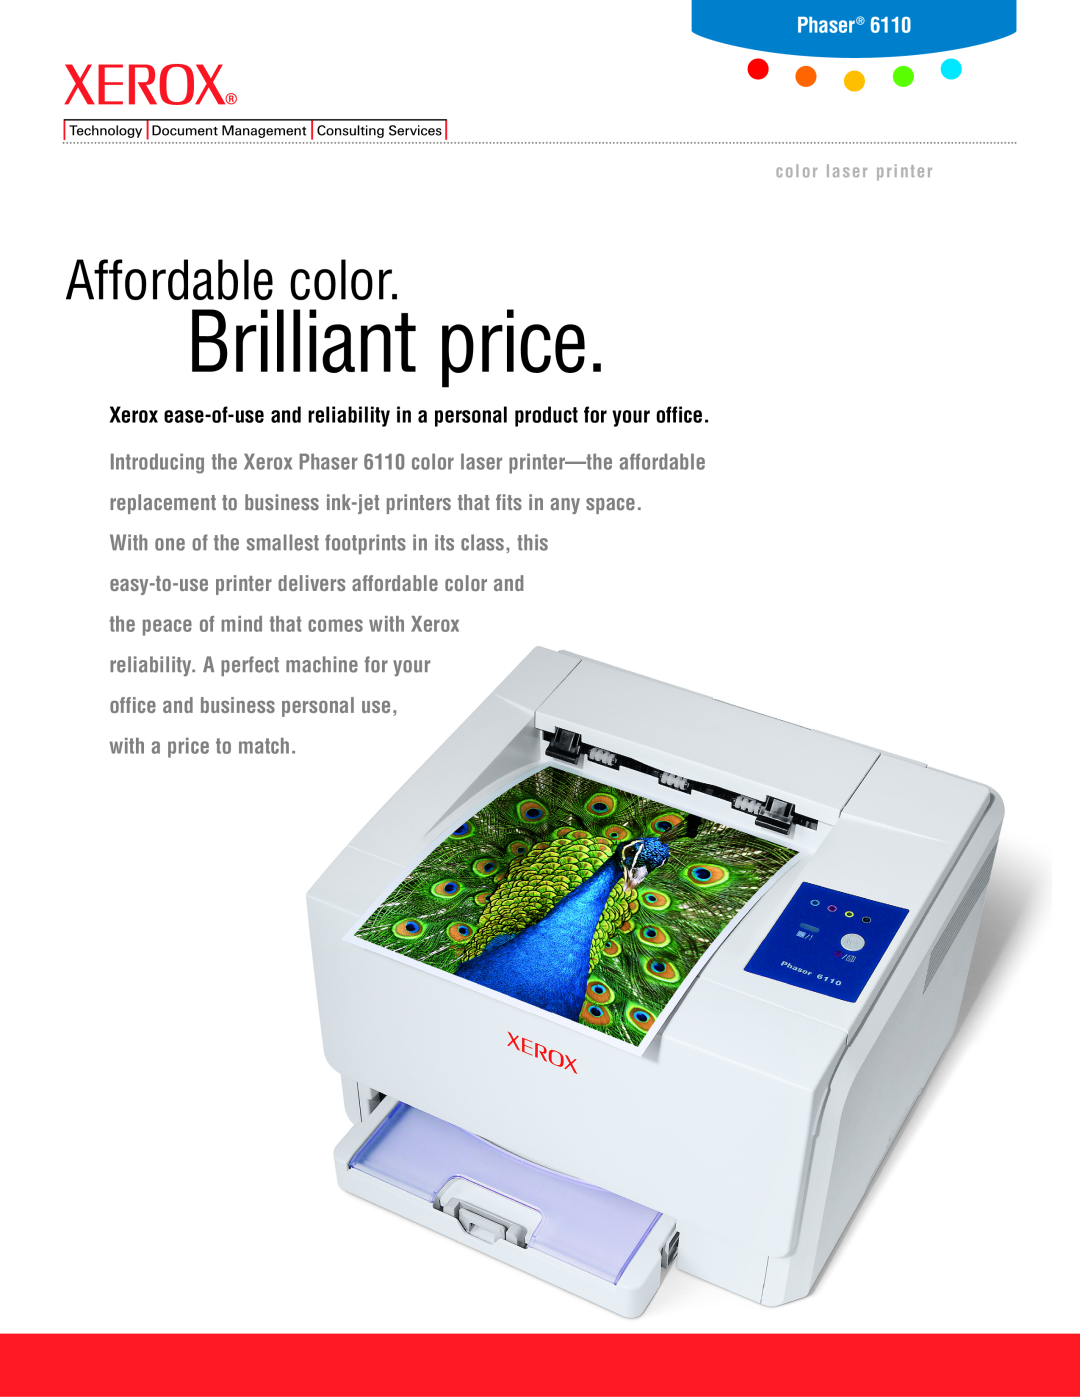 Xerox 6110N manual Phaser, Brilliant price, Affordable color, color laser printer 